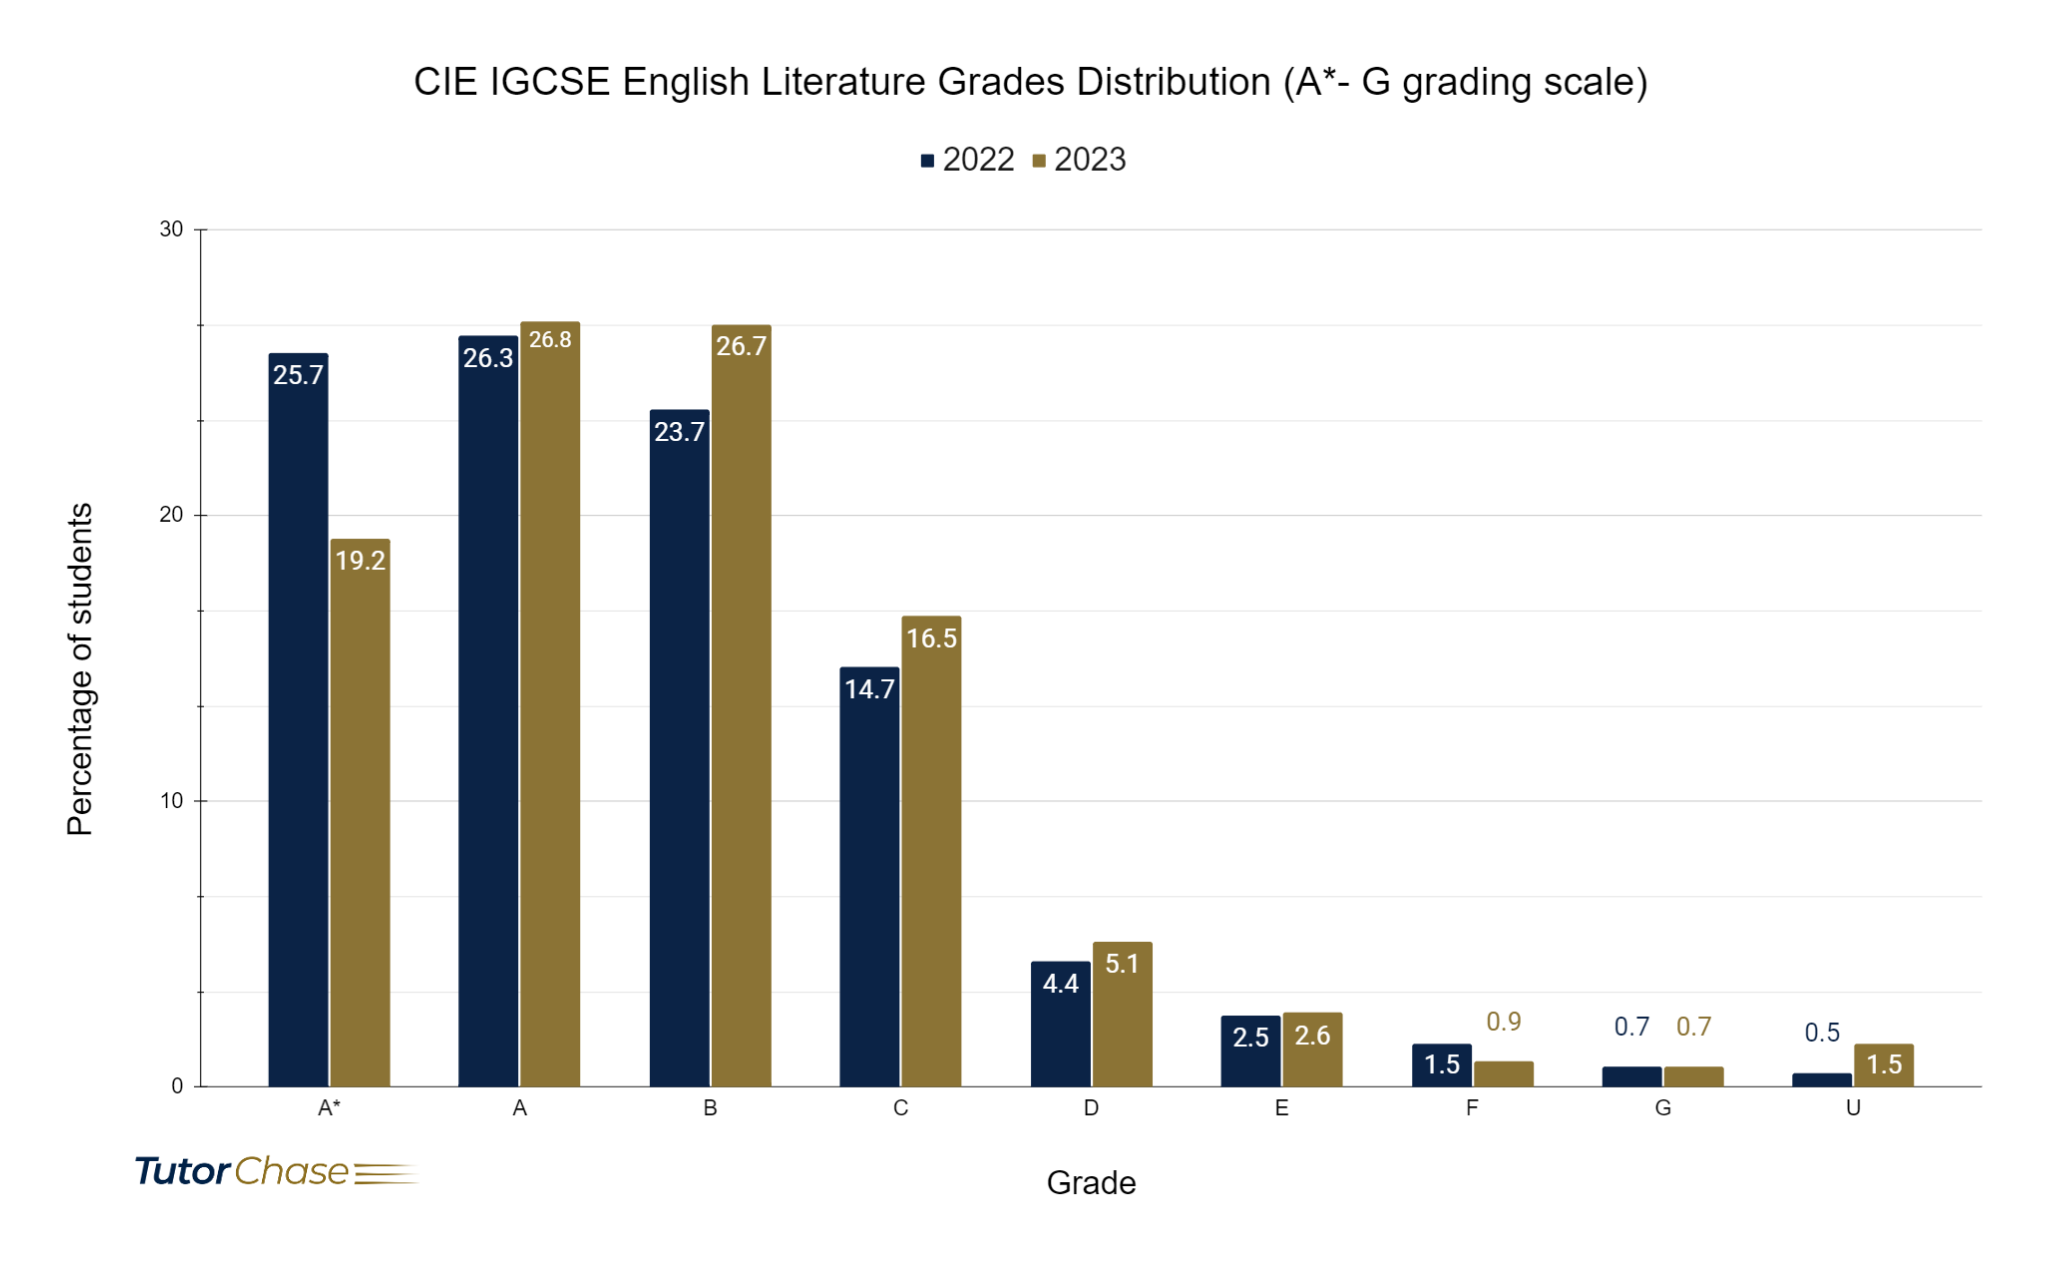 Grades distribution of CIE IGCSE English Literature for 2022 and 2023